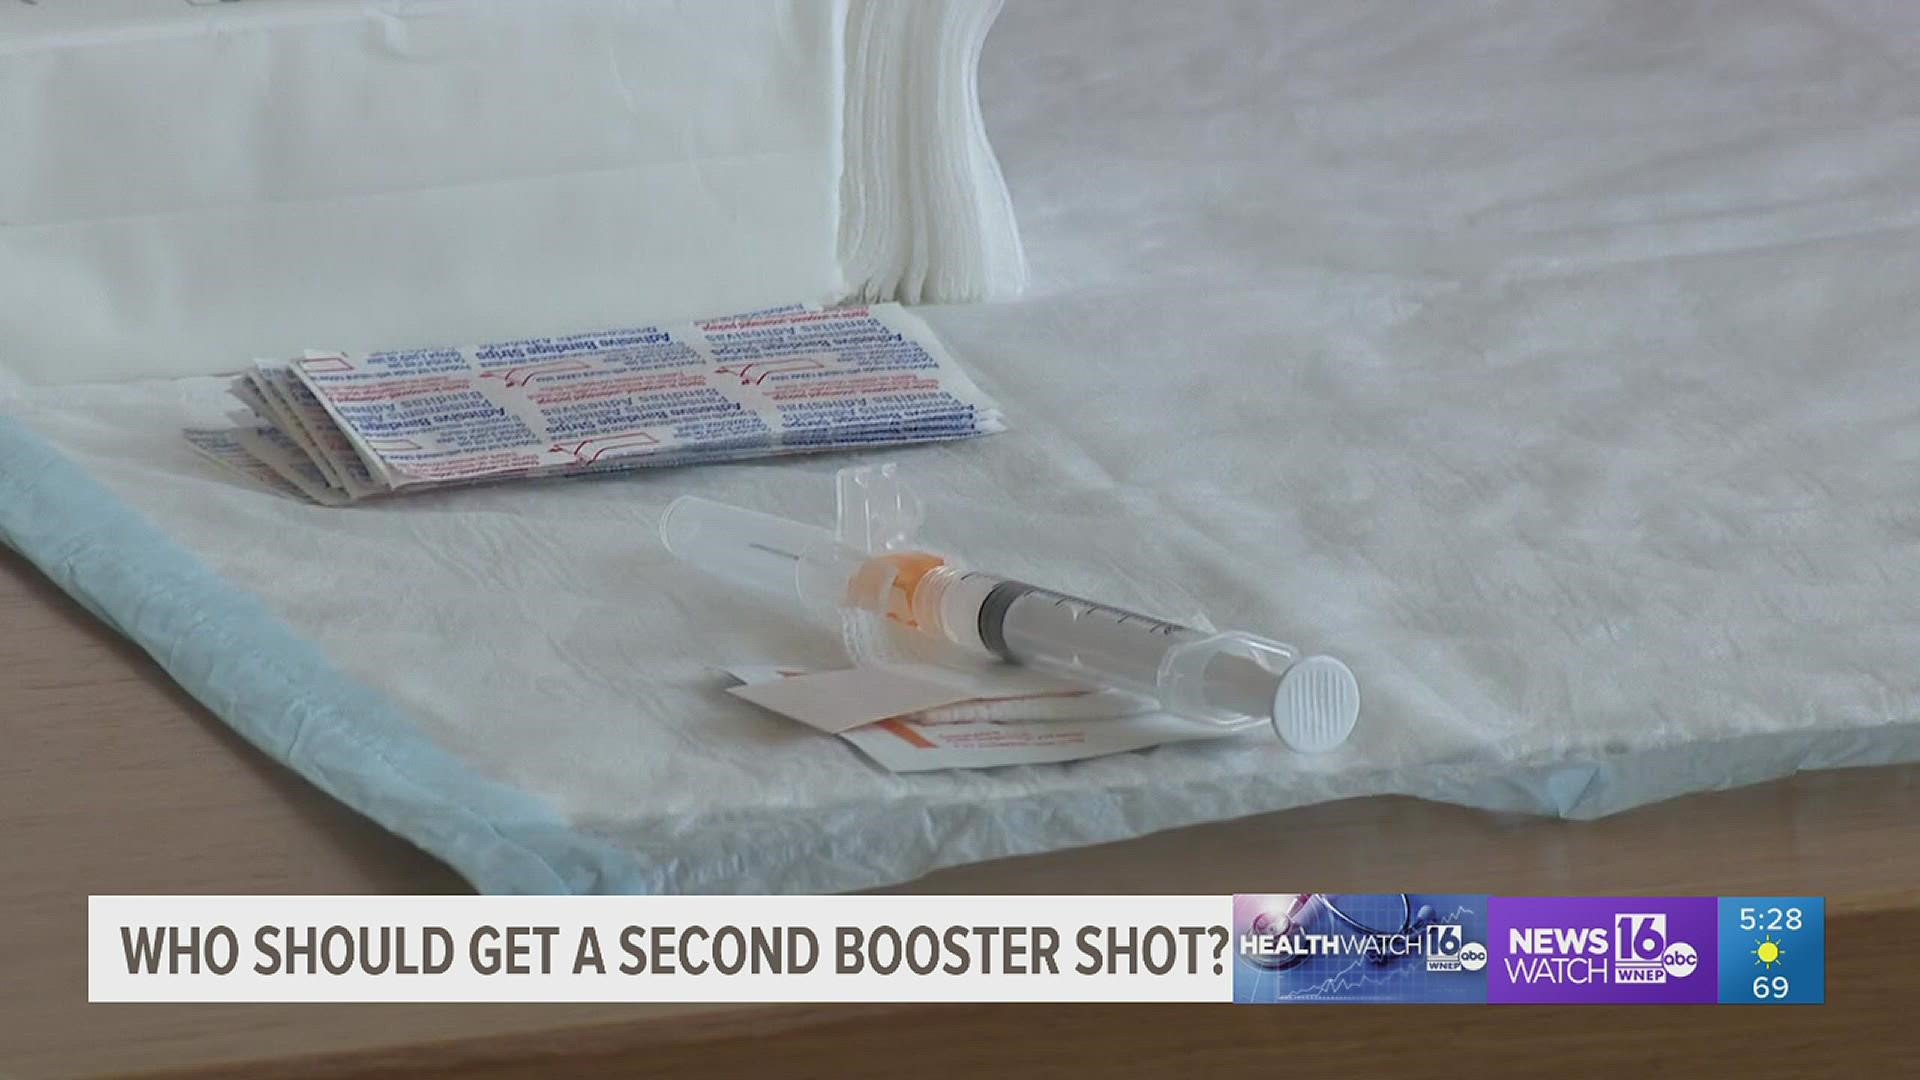 Earlier this year the Food and Drug Administration authorized a second booster shot for some people to protect against COVID-19. But who should get these vaccines?